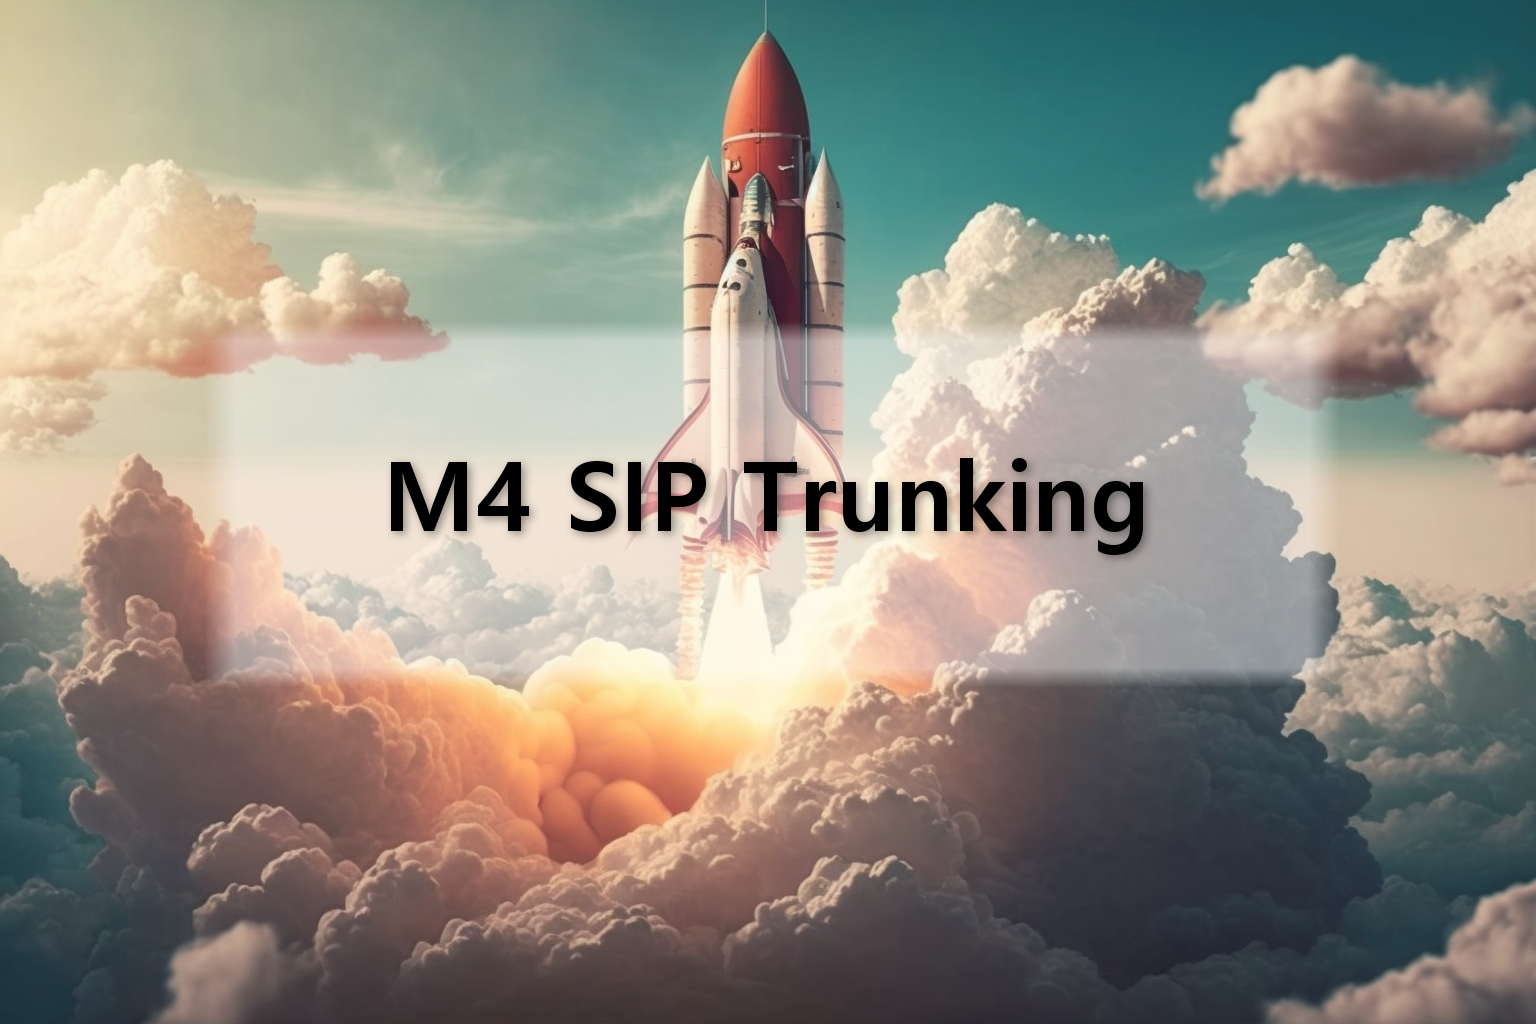 M4 SIP Trunking Release